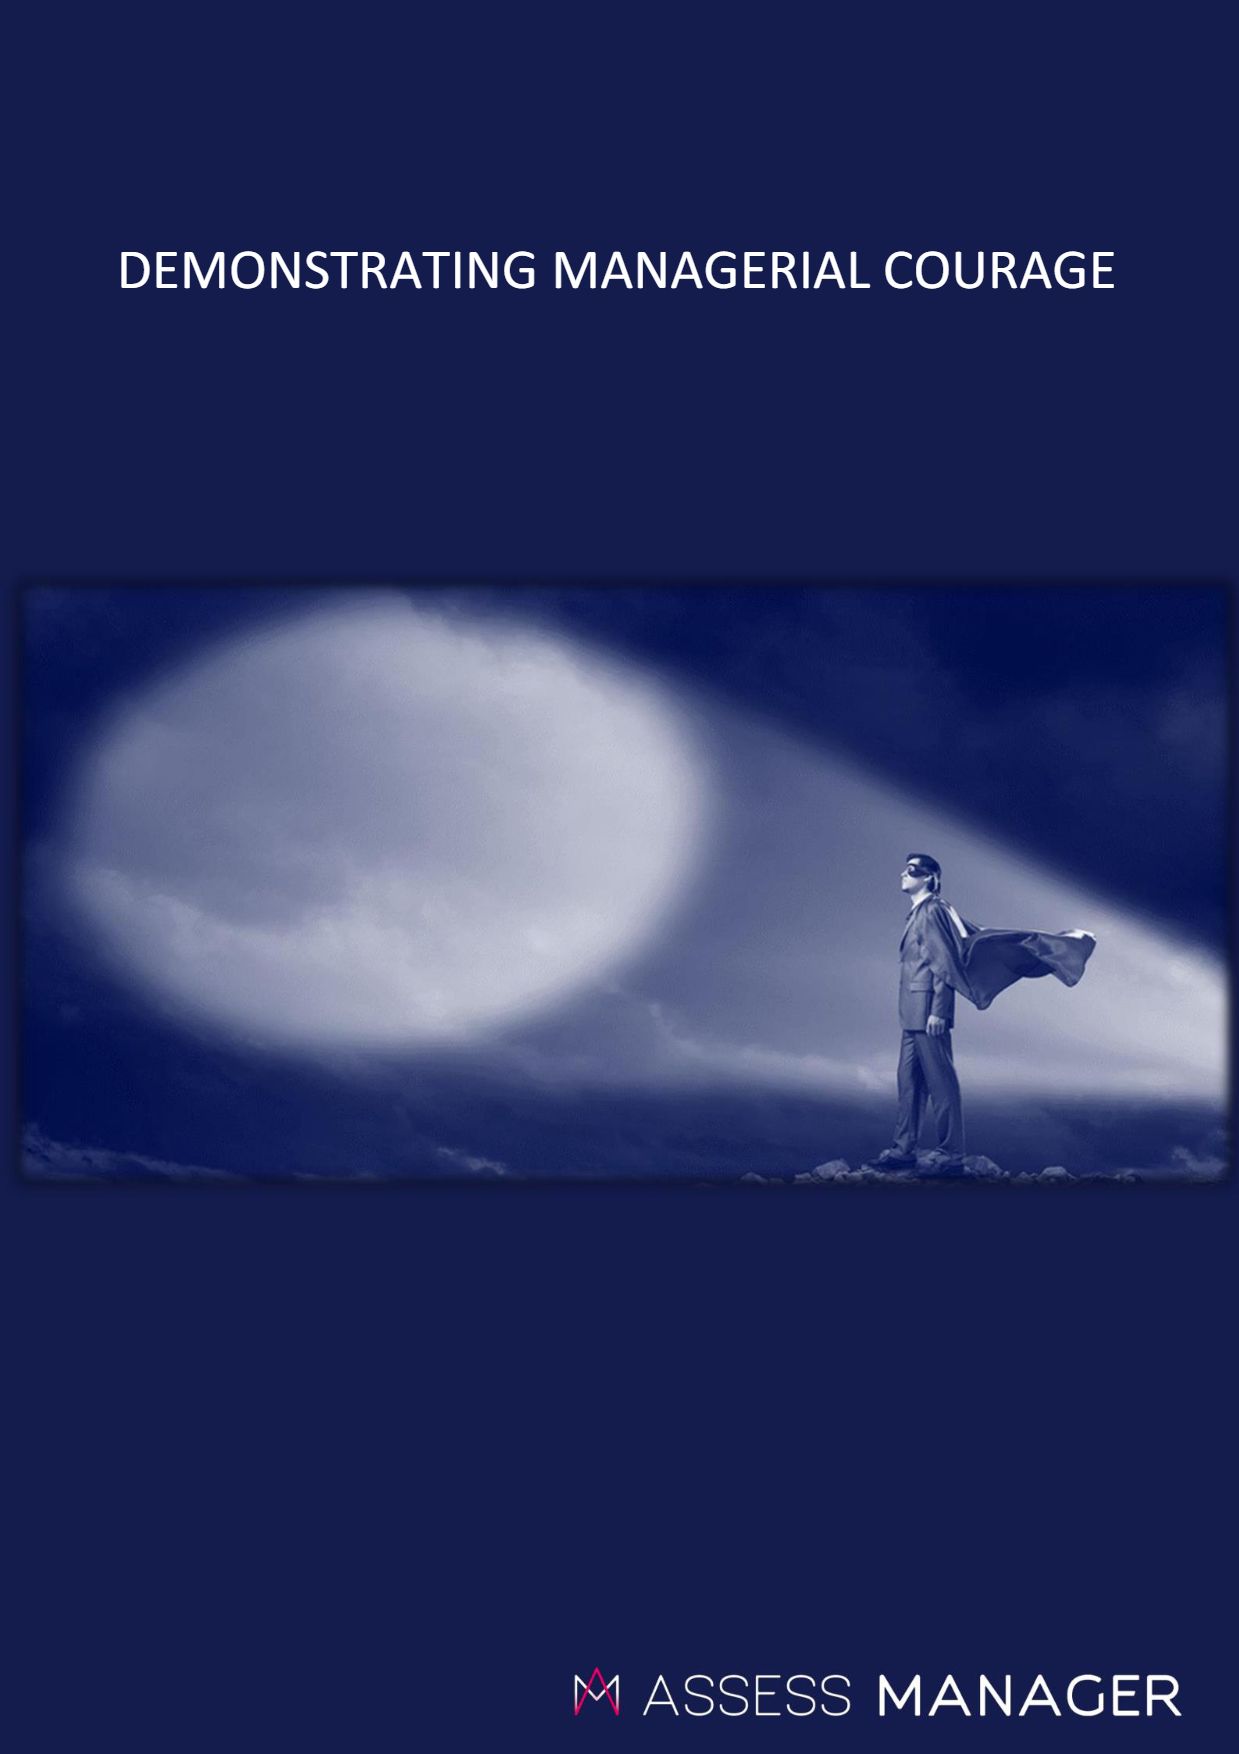 Demonstrating managerial courage